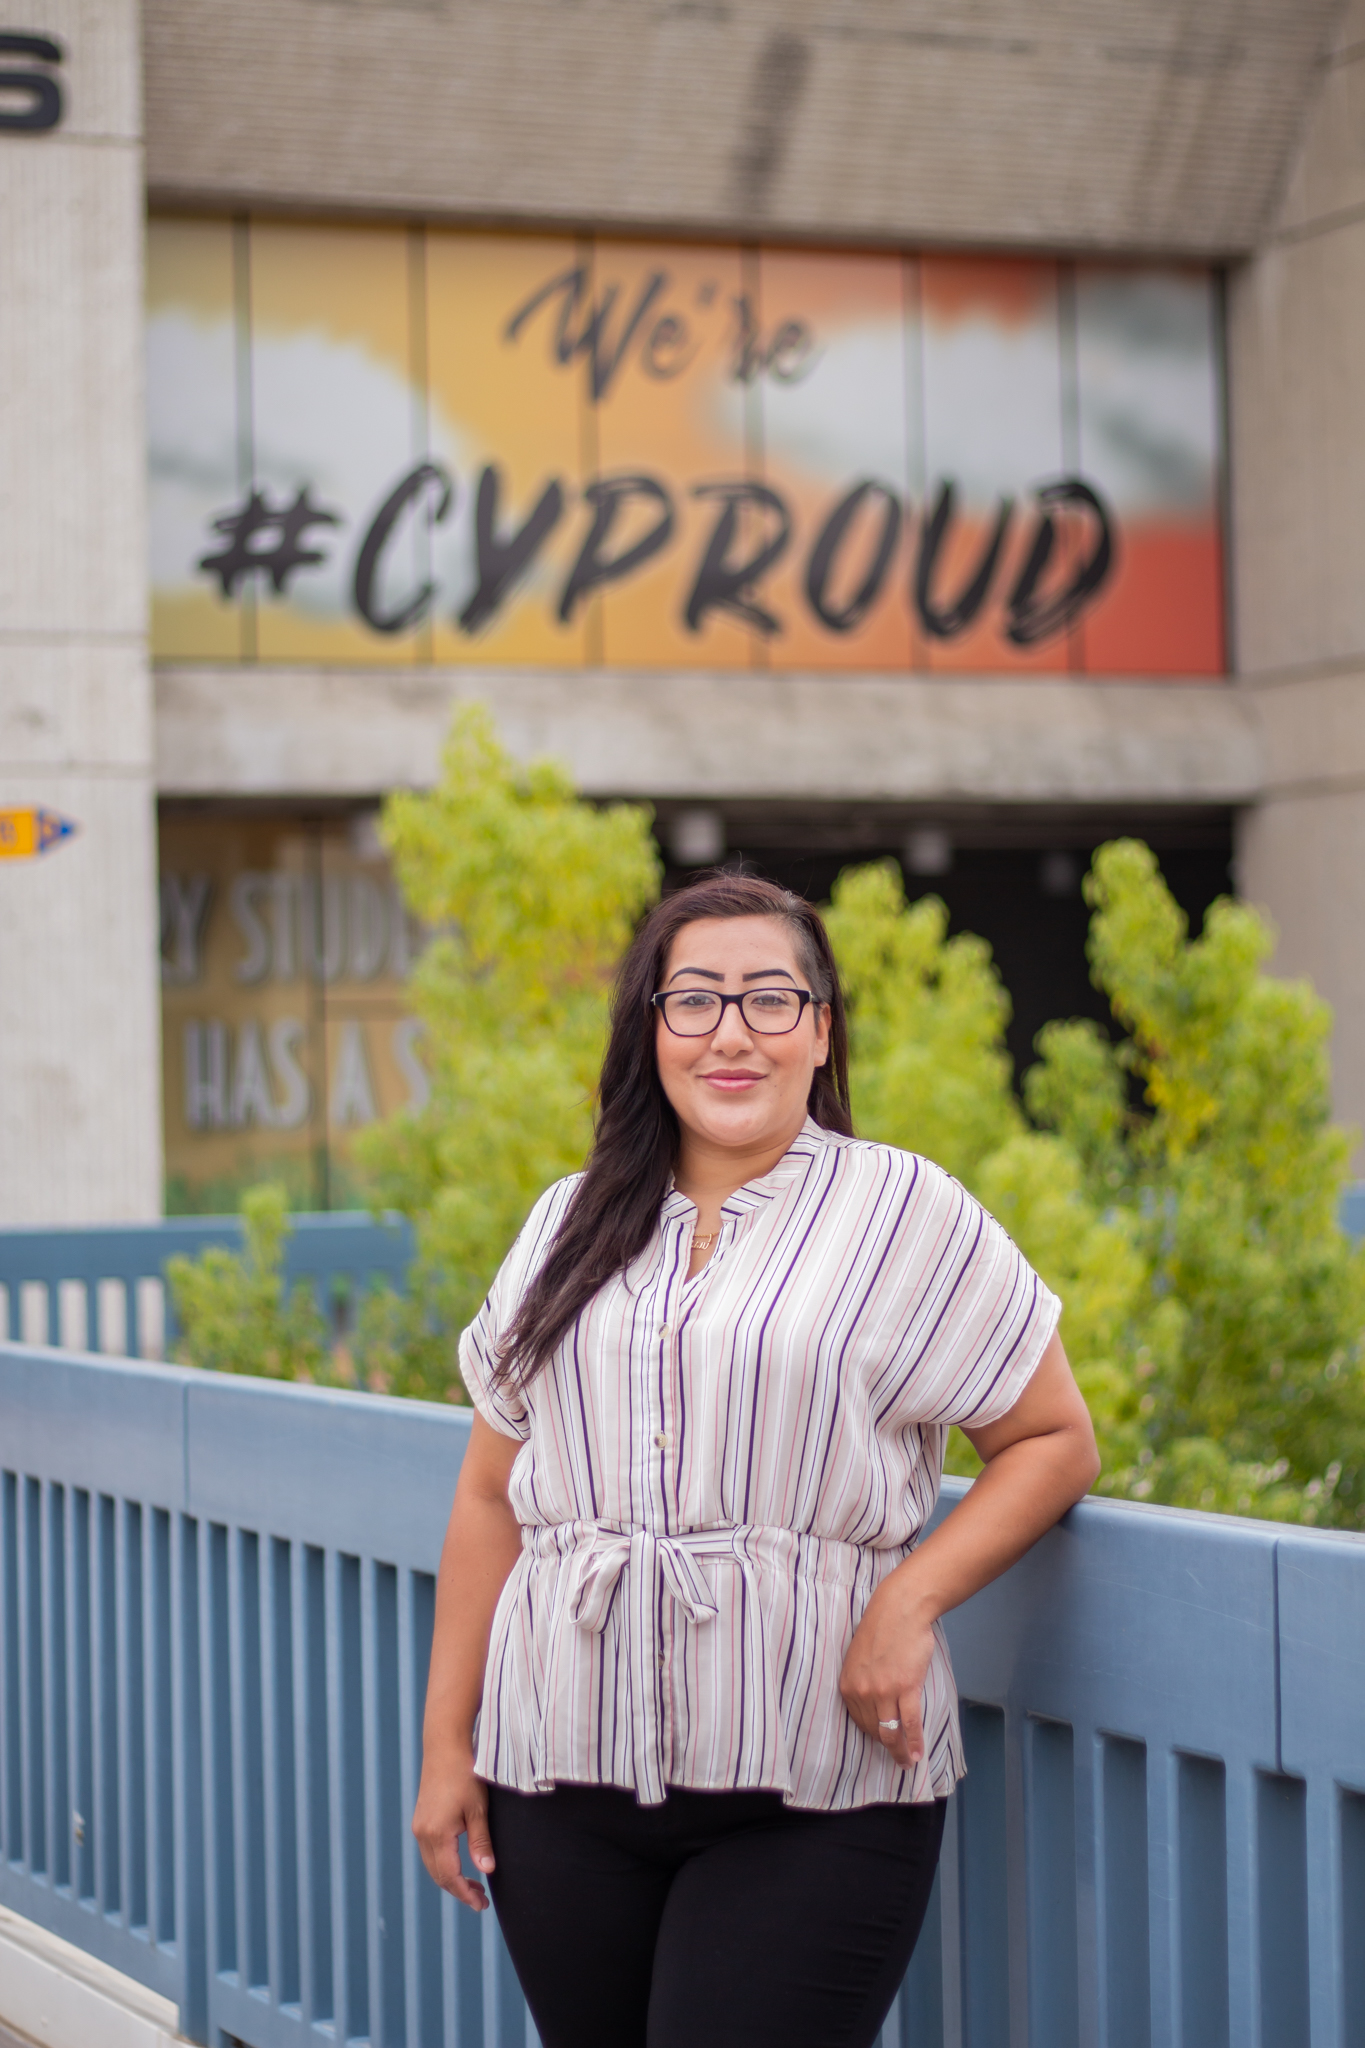 Cypress College student Melissa Whitewater wears a casual shirt as she stands on the second-level piazza on campus in front of a CYProud sign.